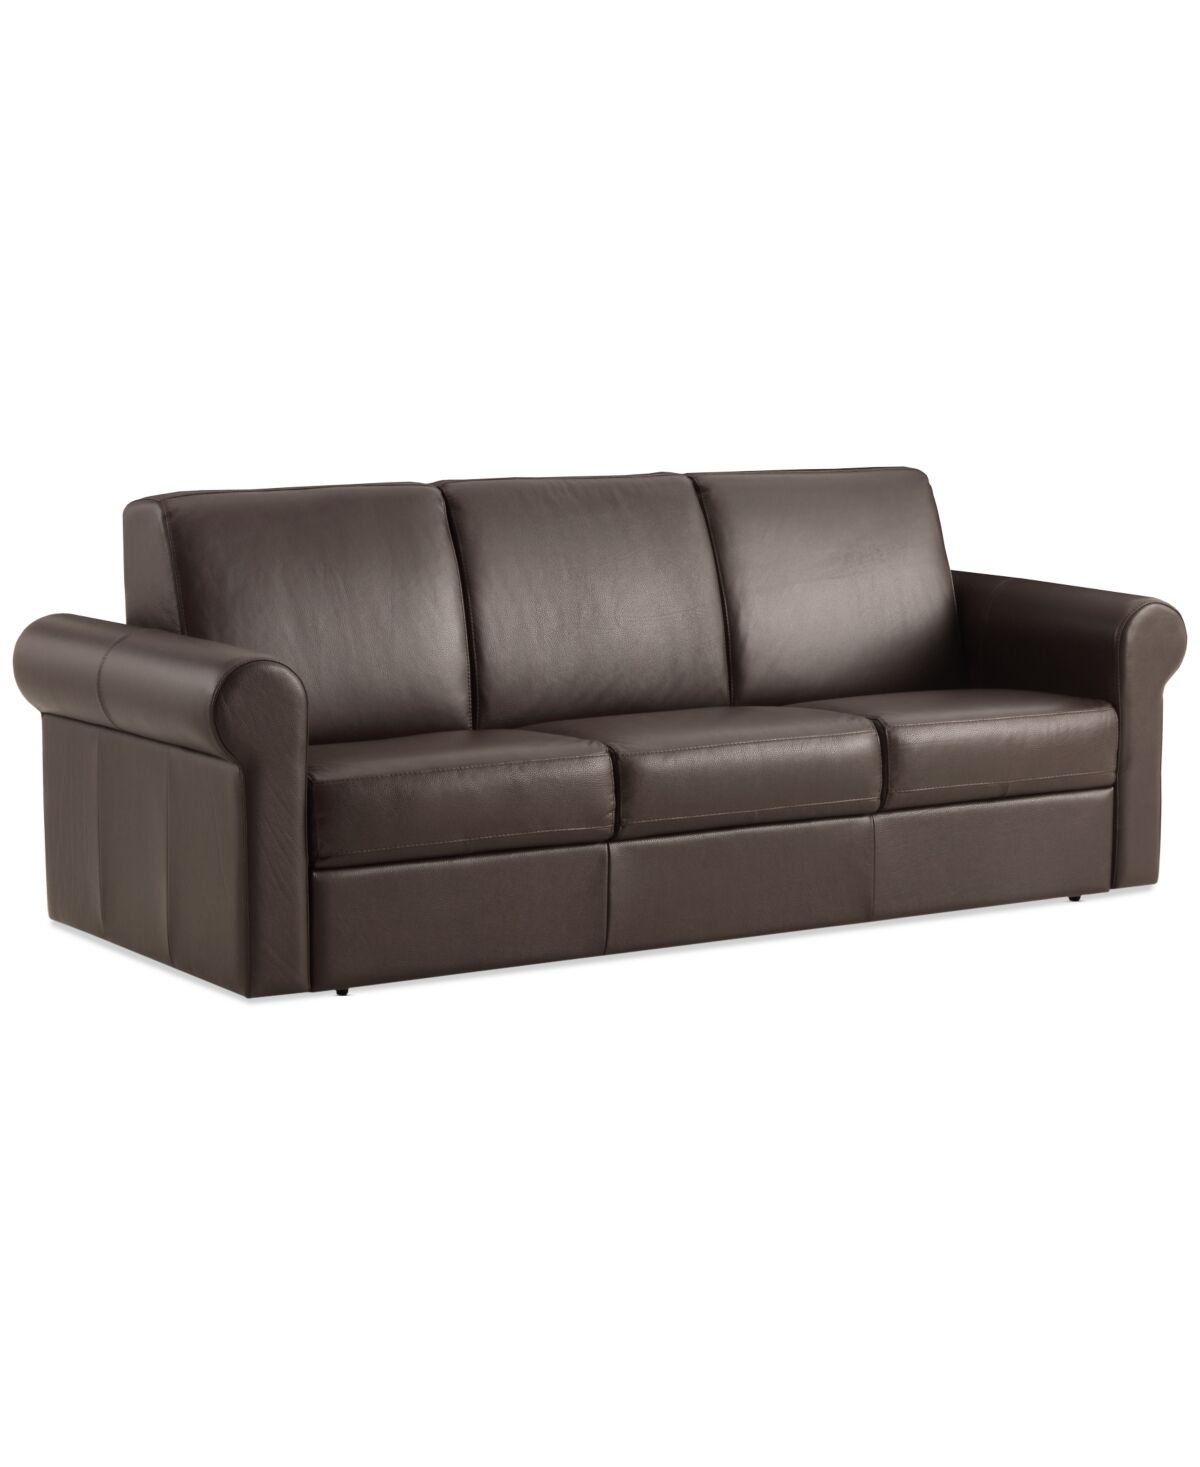 Furniture Elsher Leather Sleeper Sofa, Created for Macy's - Brown